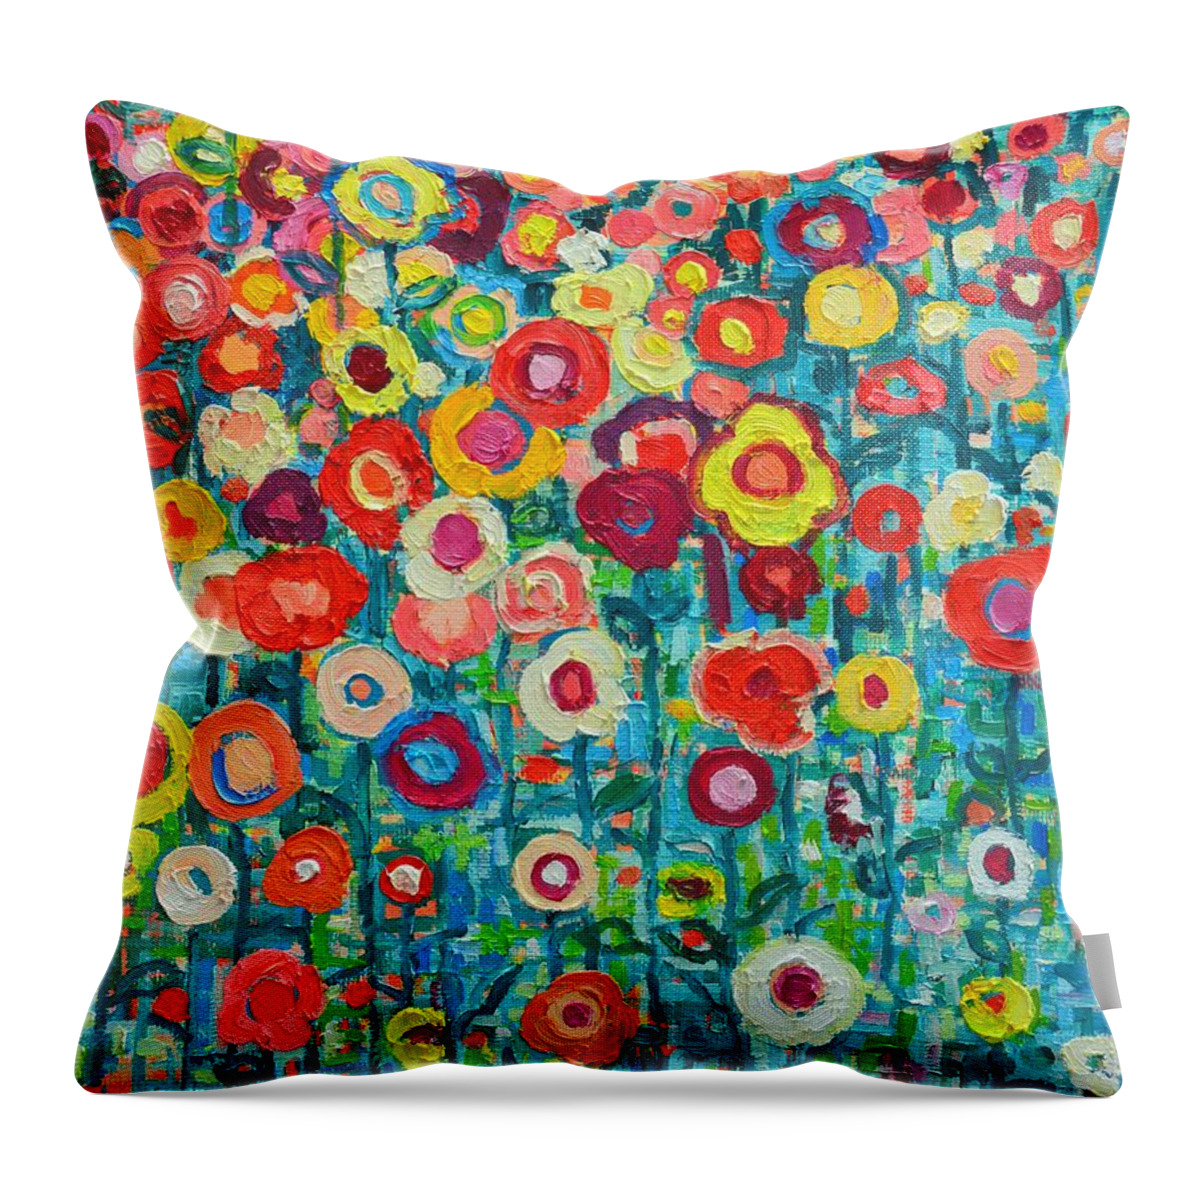 Abstract Throw Pillow featuring the painting Abstract Garden Of Happiness by Ana Maria Edulescu